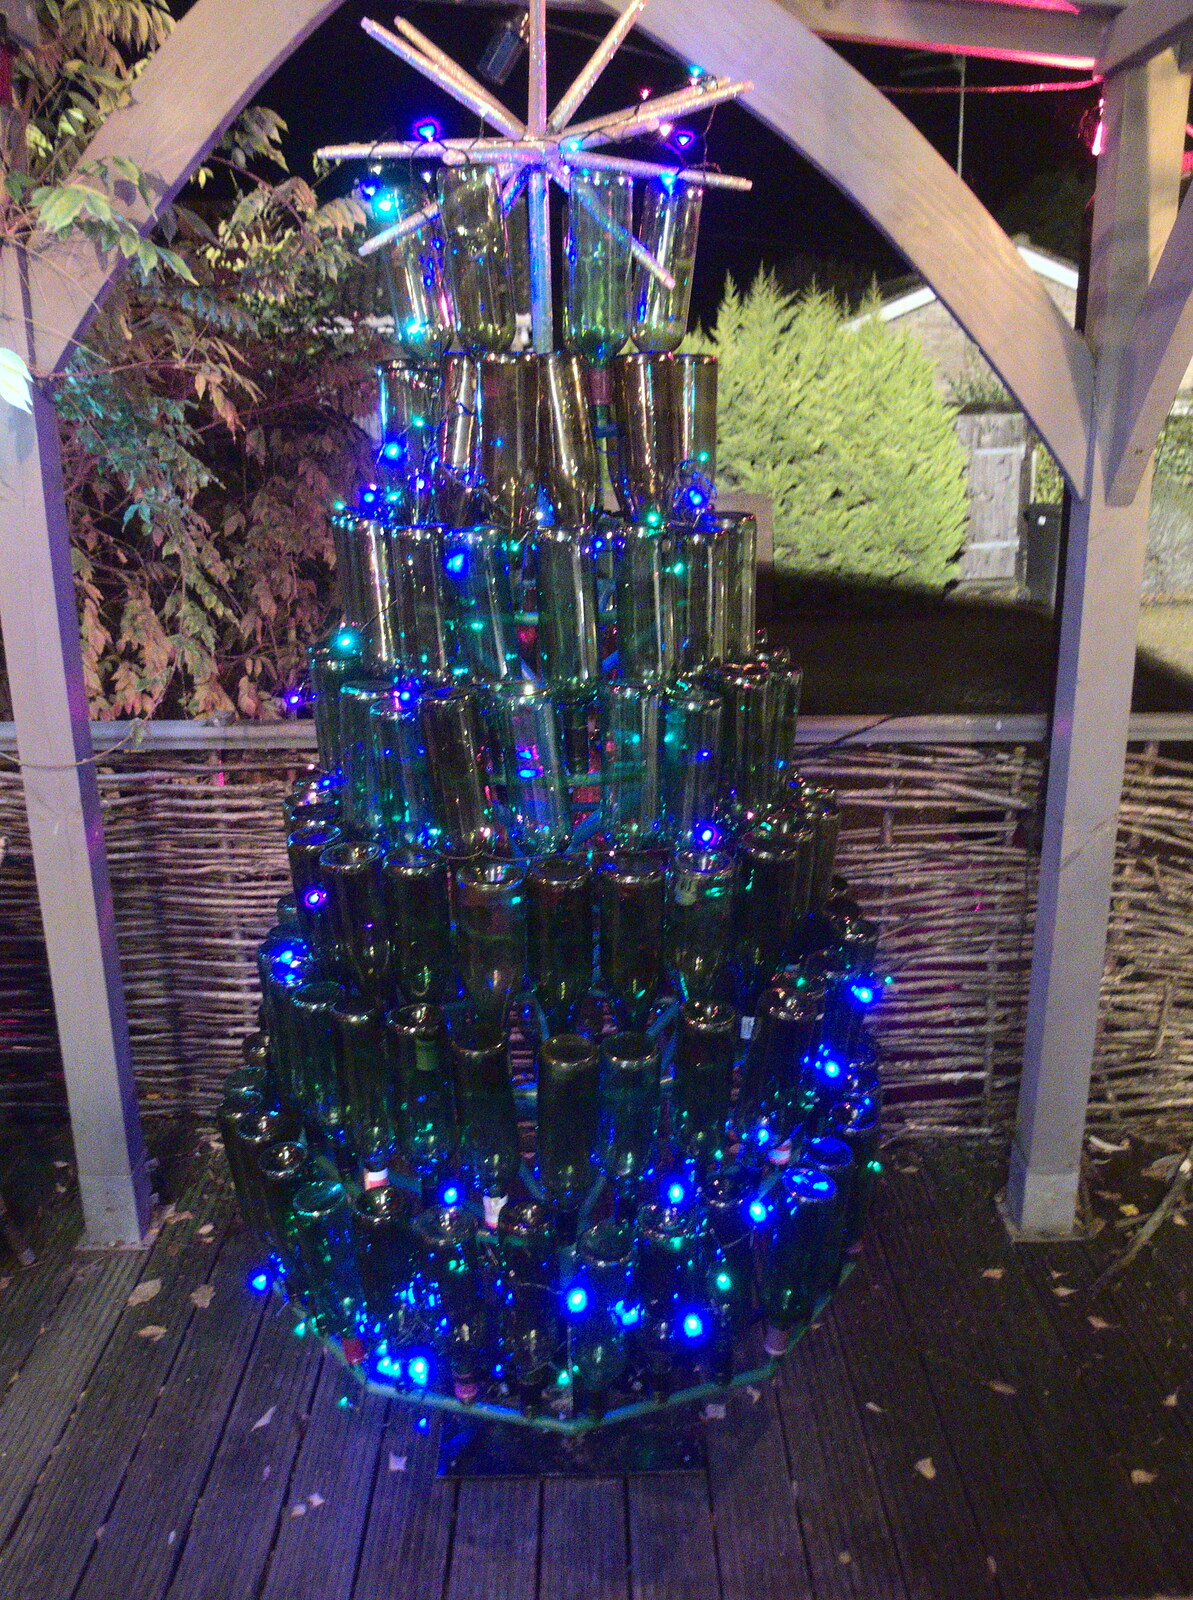 The Red Lion has a nice bottle Christmas tree from Little Venice and the BSCC Christmas Dinner, London and Norfolk - 1st December 2018